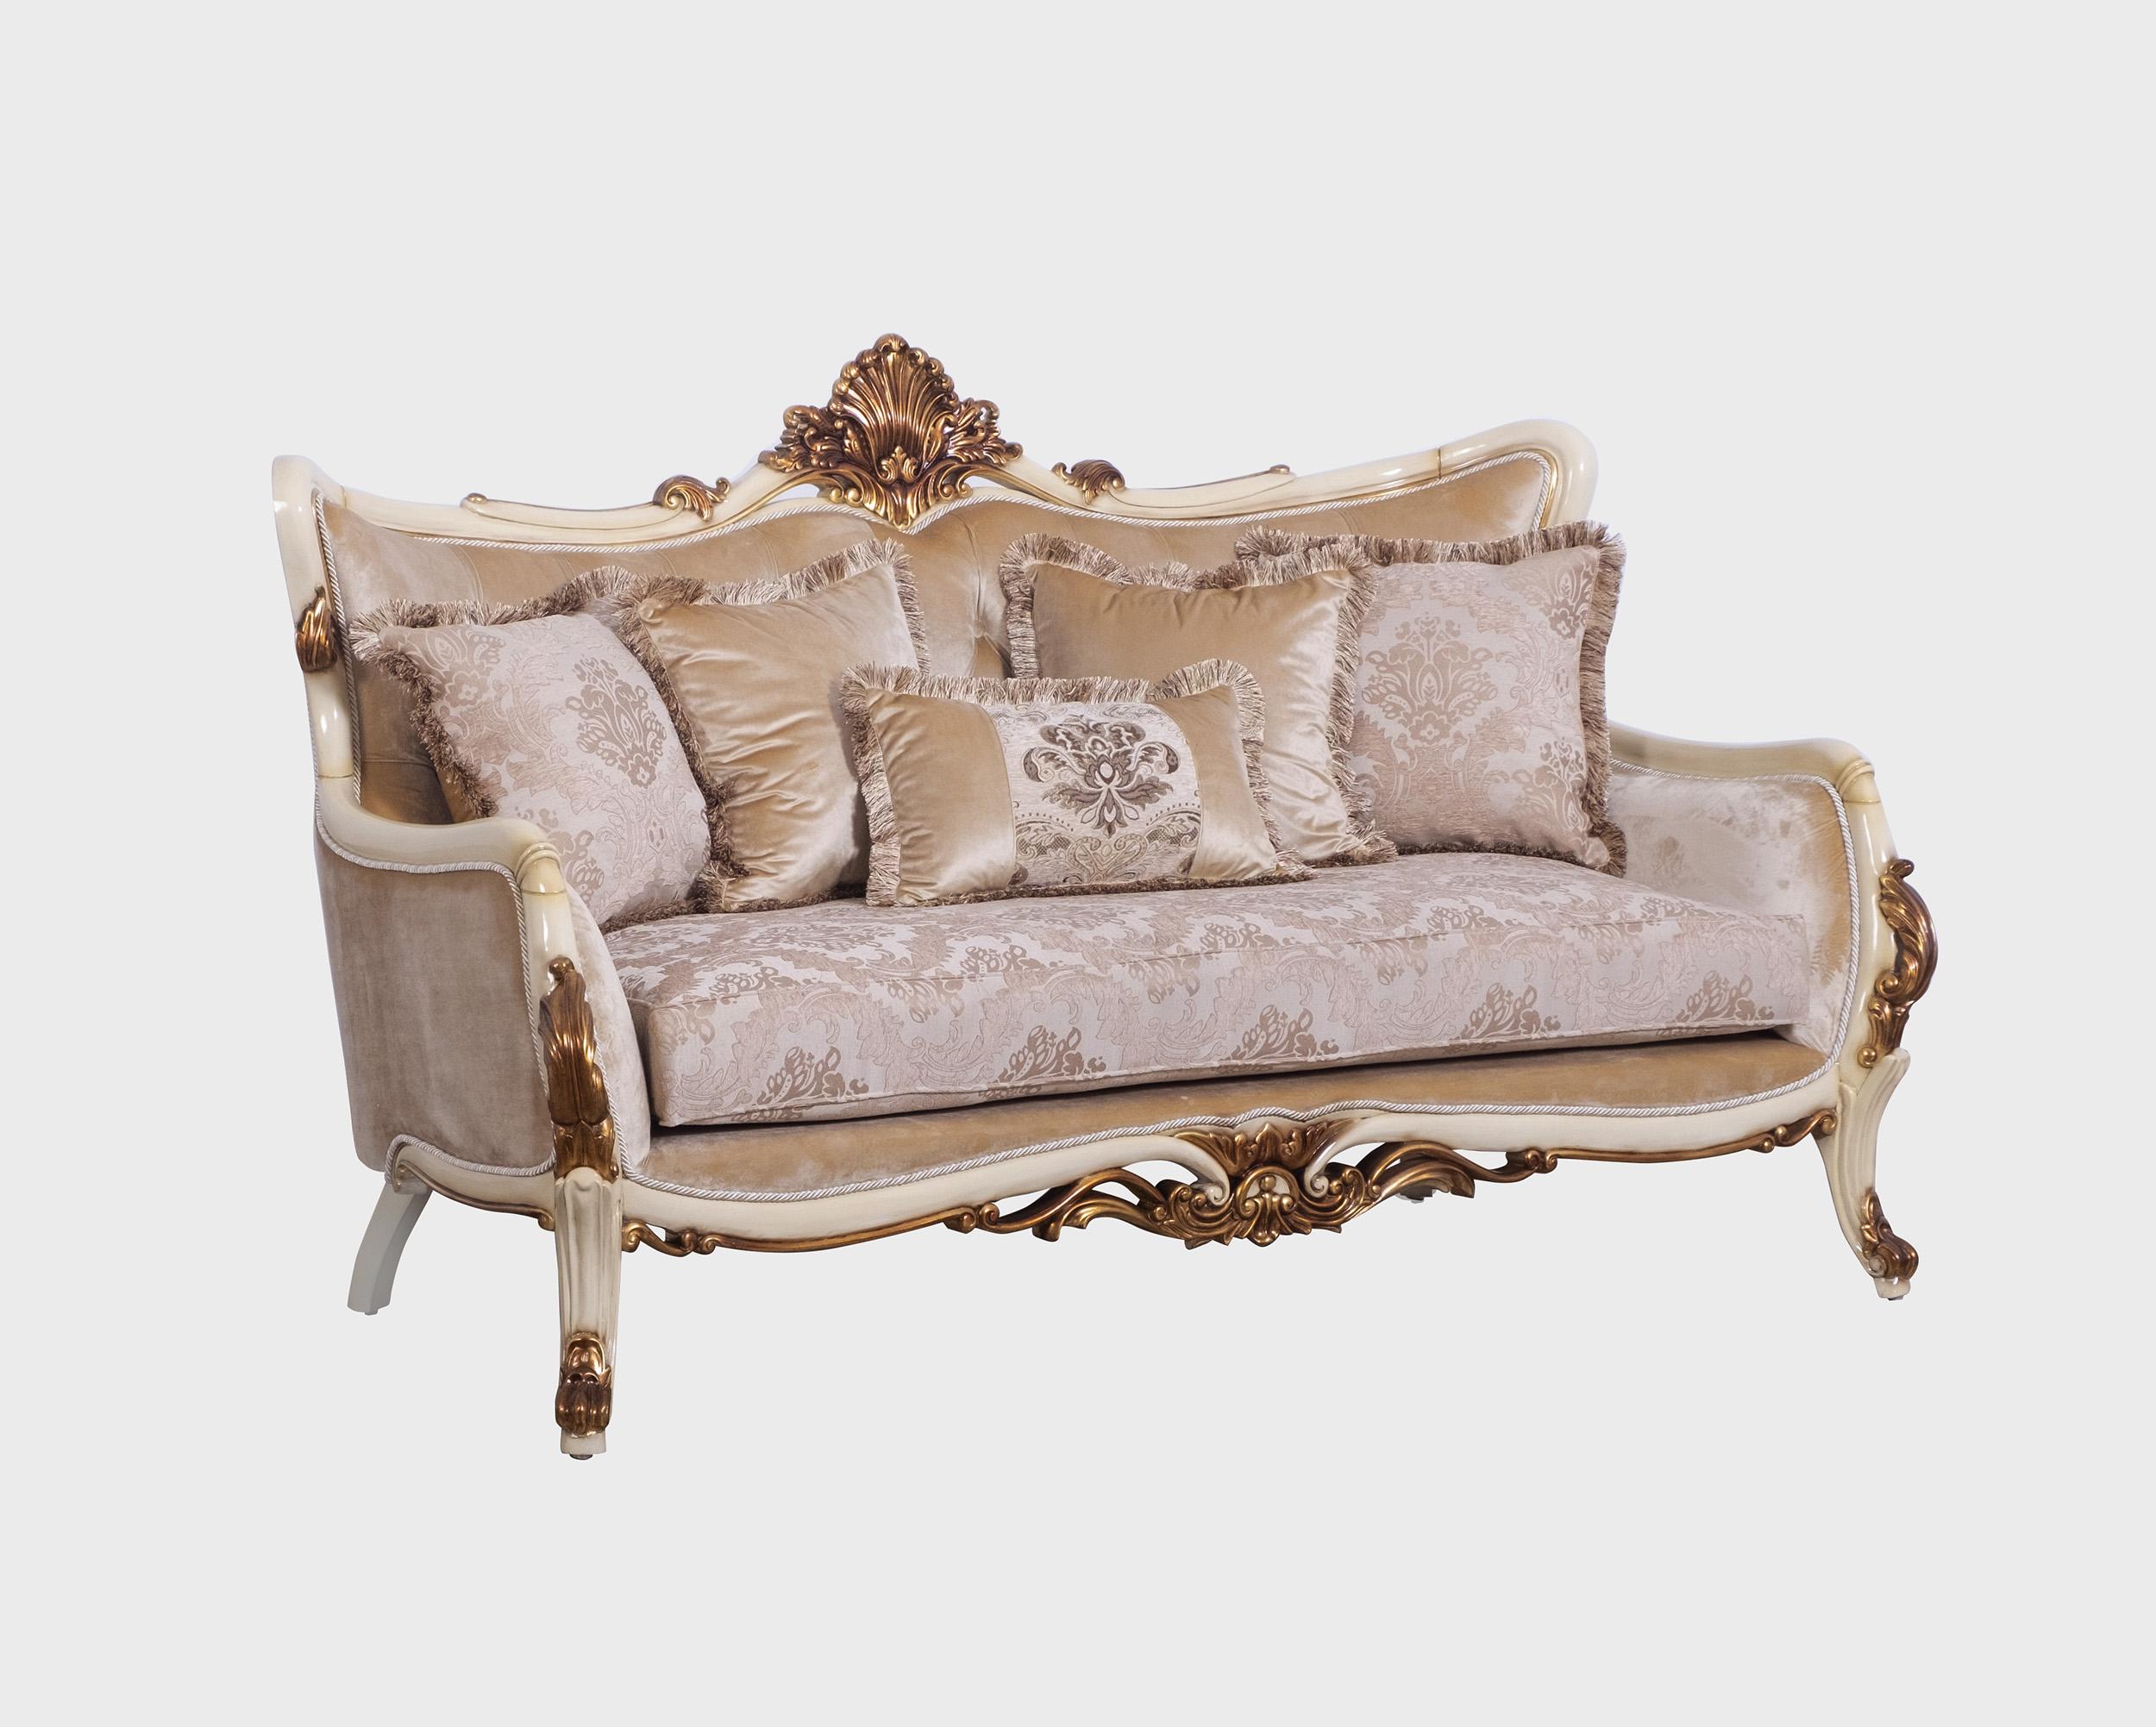 Classic, Traditional Loveseat VERONICA 47075-L in Antique, Gold, Beige Fabric